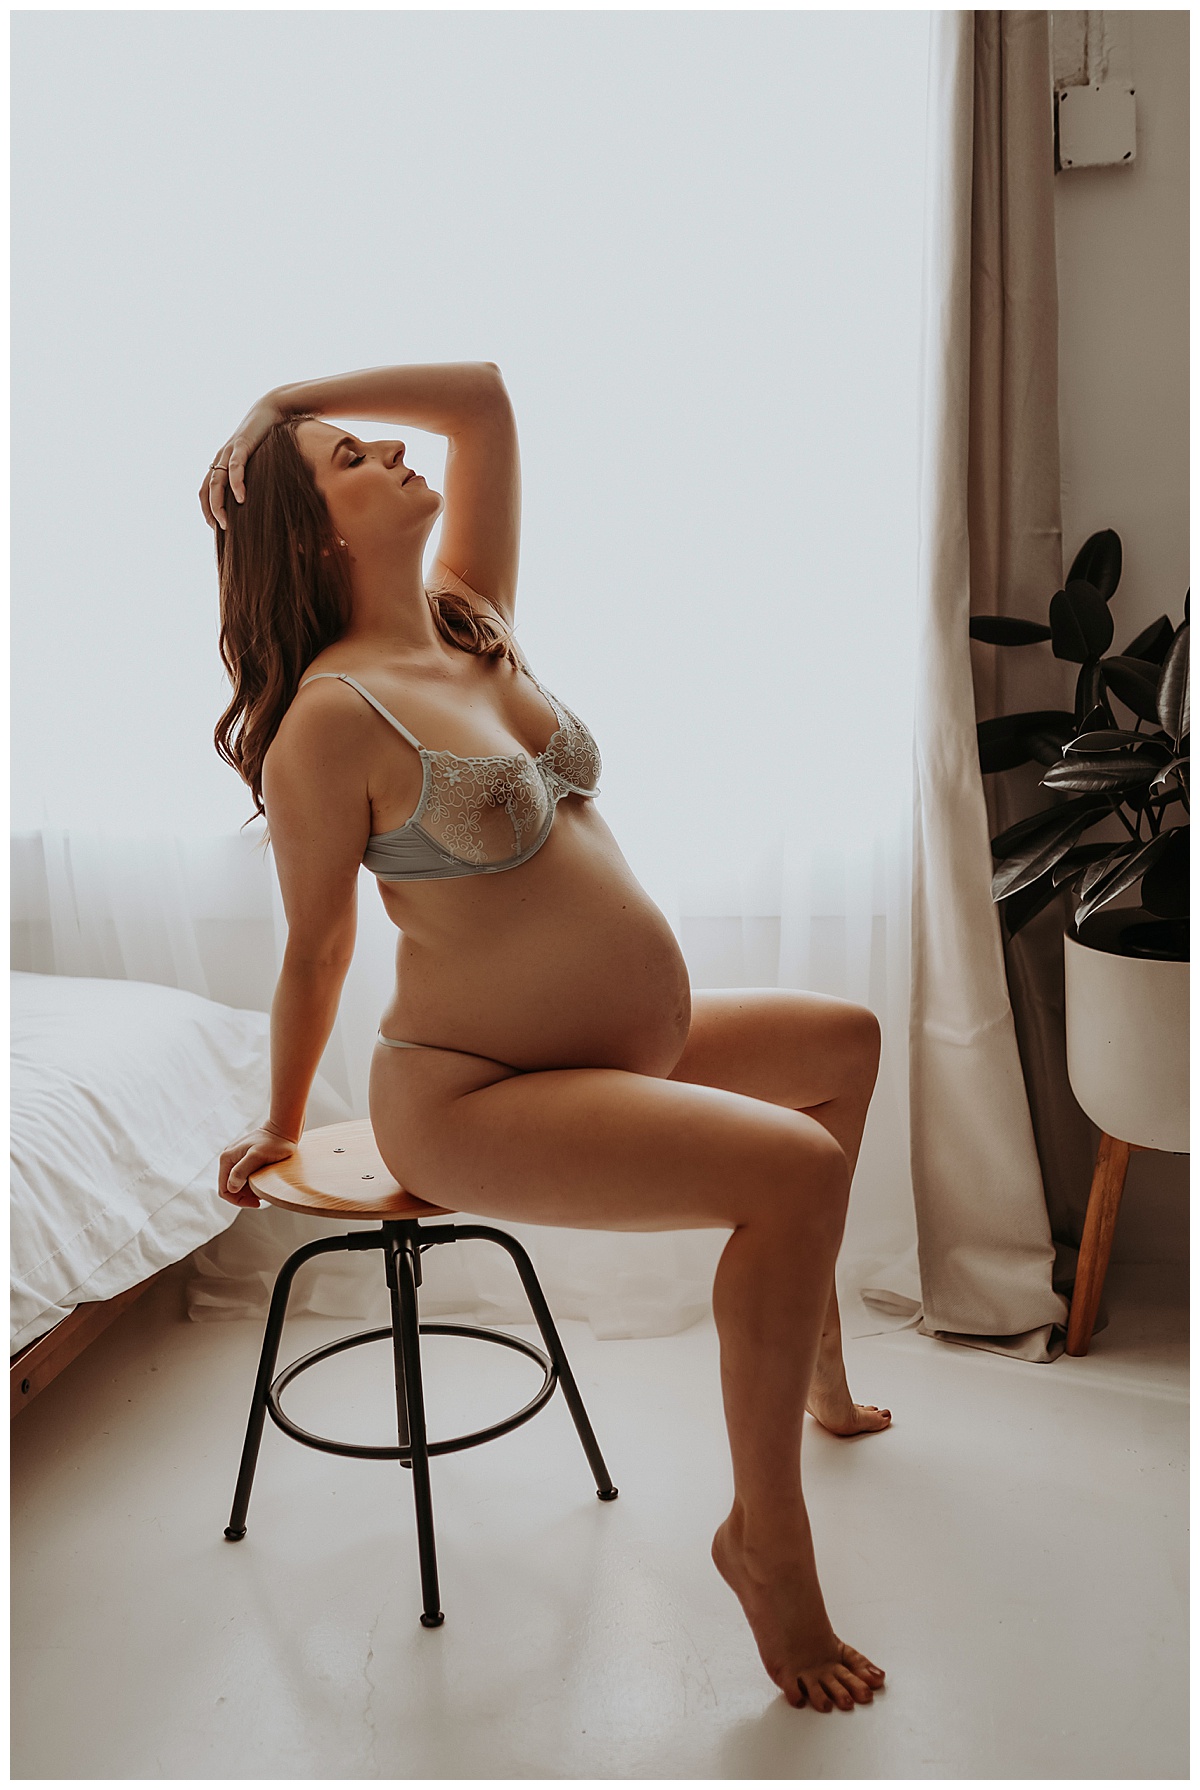 Pregnant lady sits on barstool in lingerie for Maternity Boudoir session